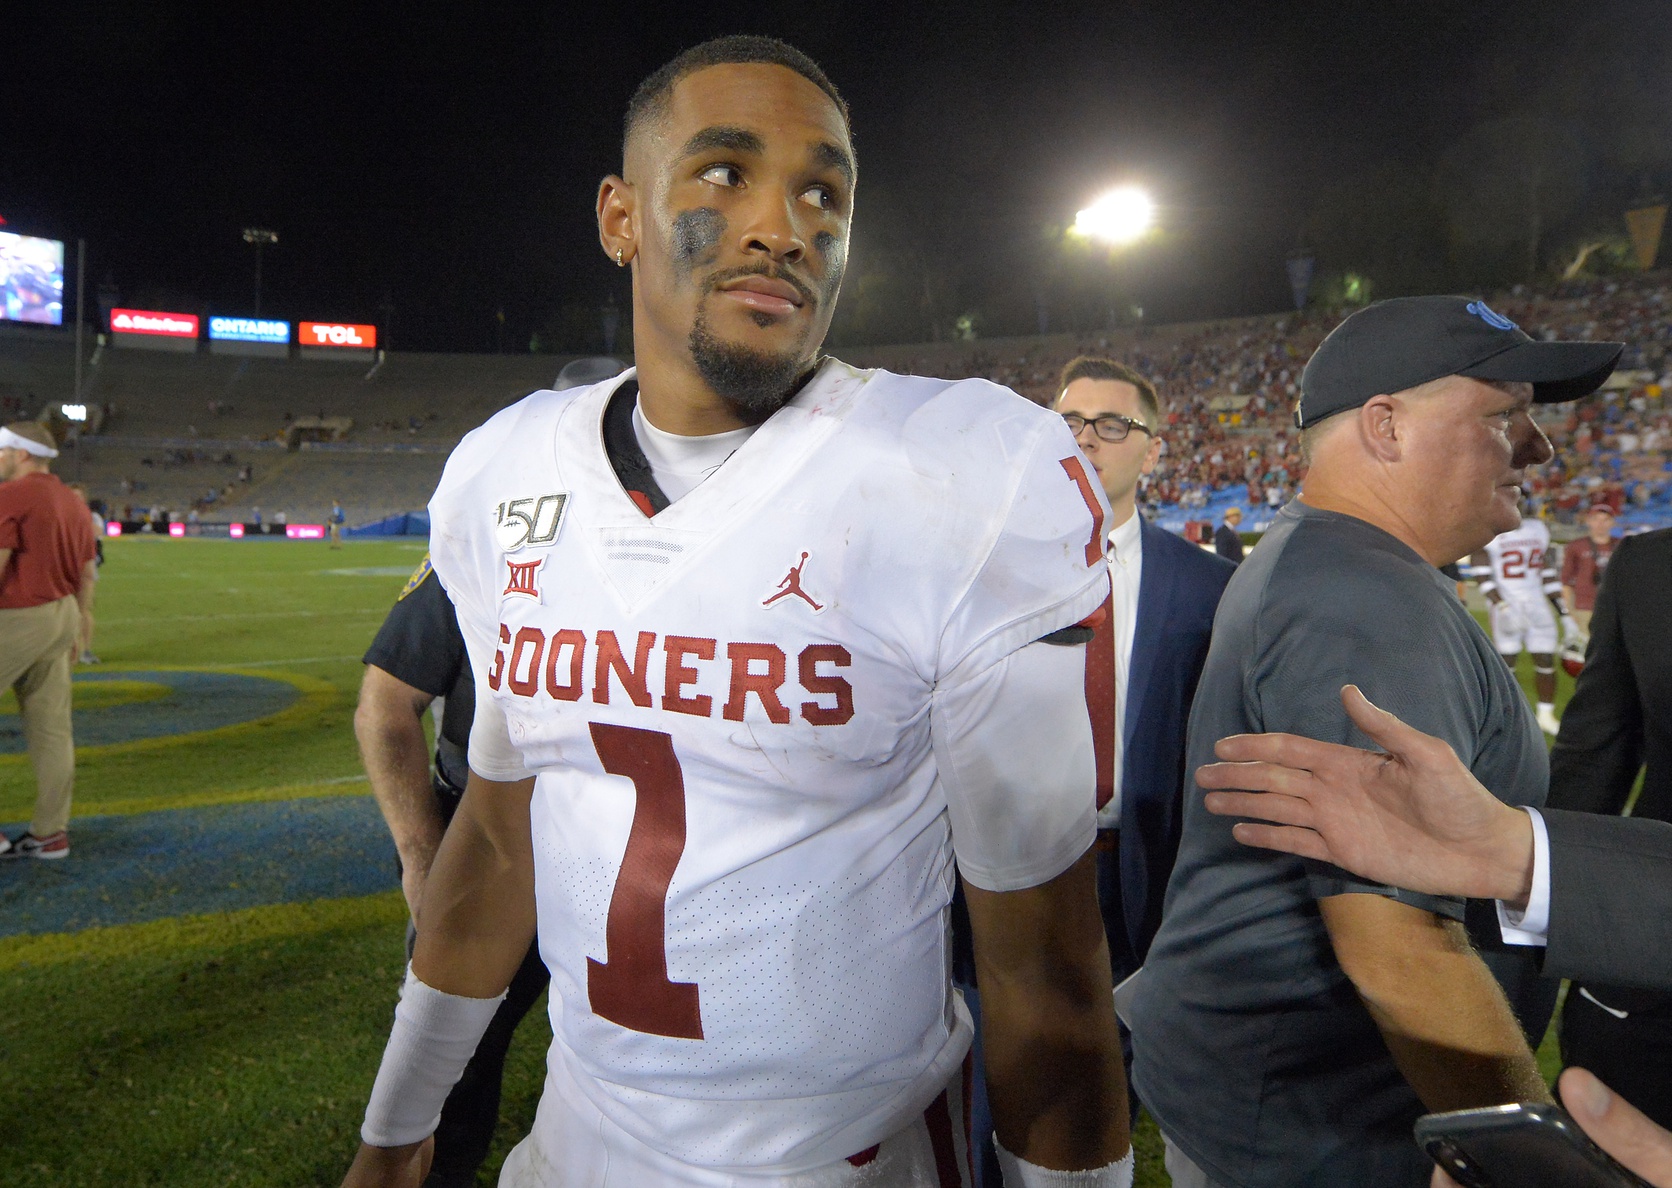 Roll Jalen Roll How Jalen Hurts has forever changed College Football